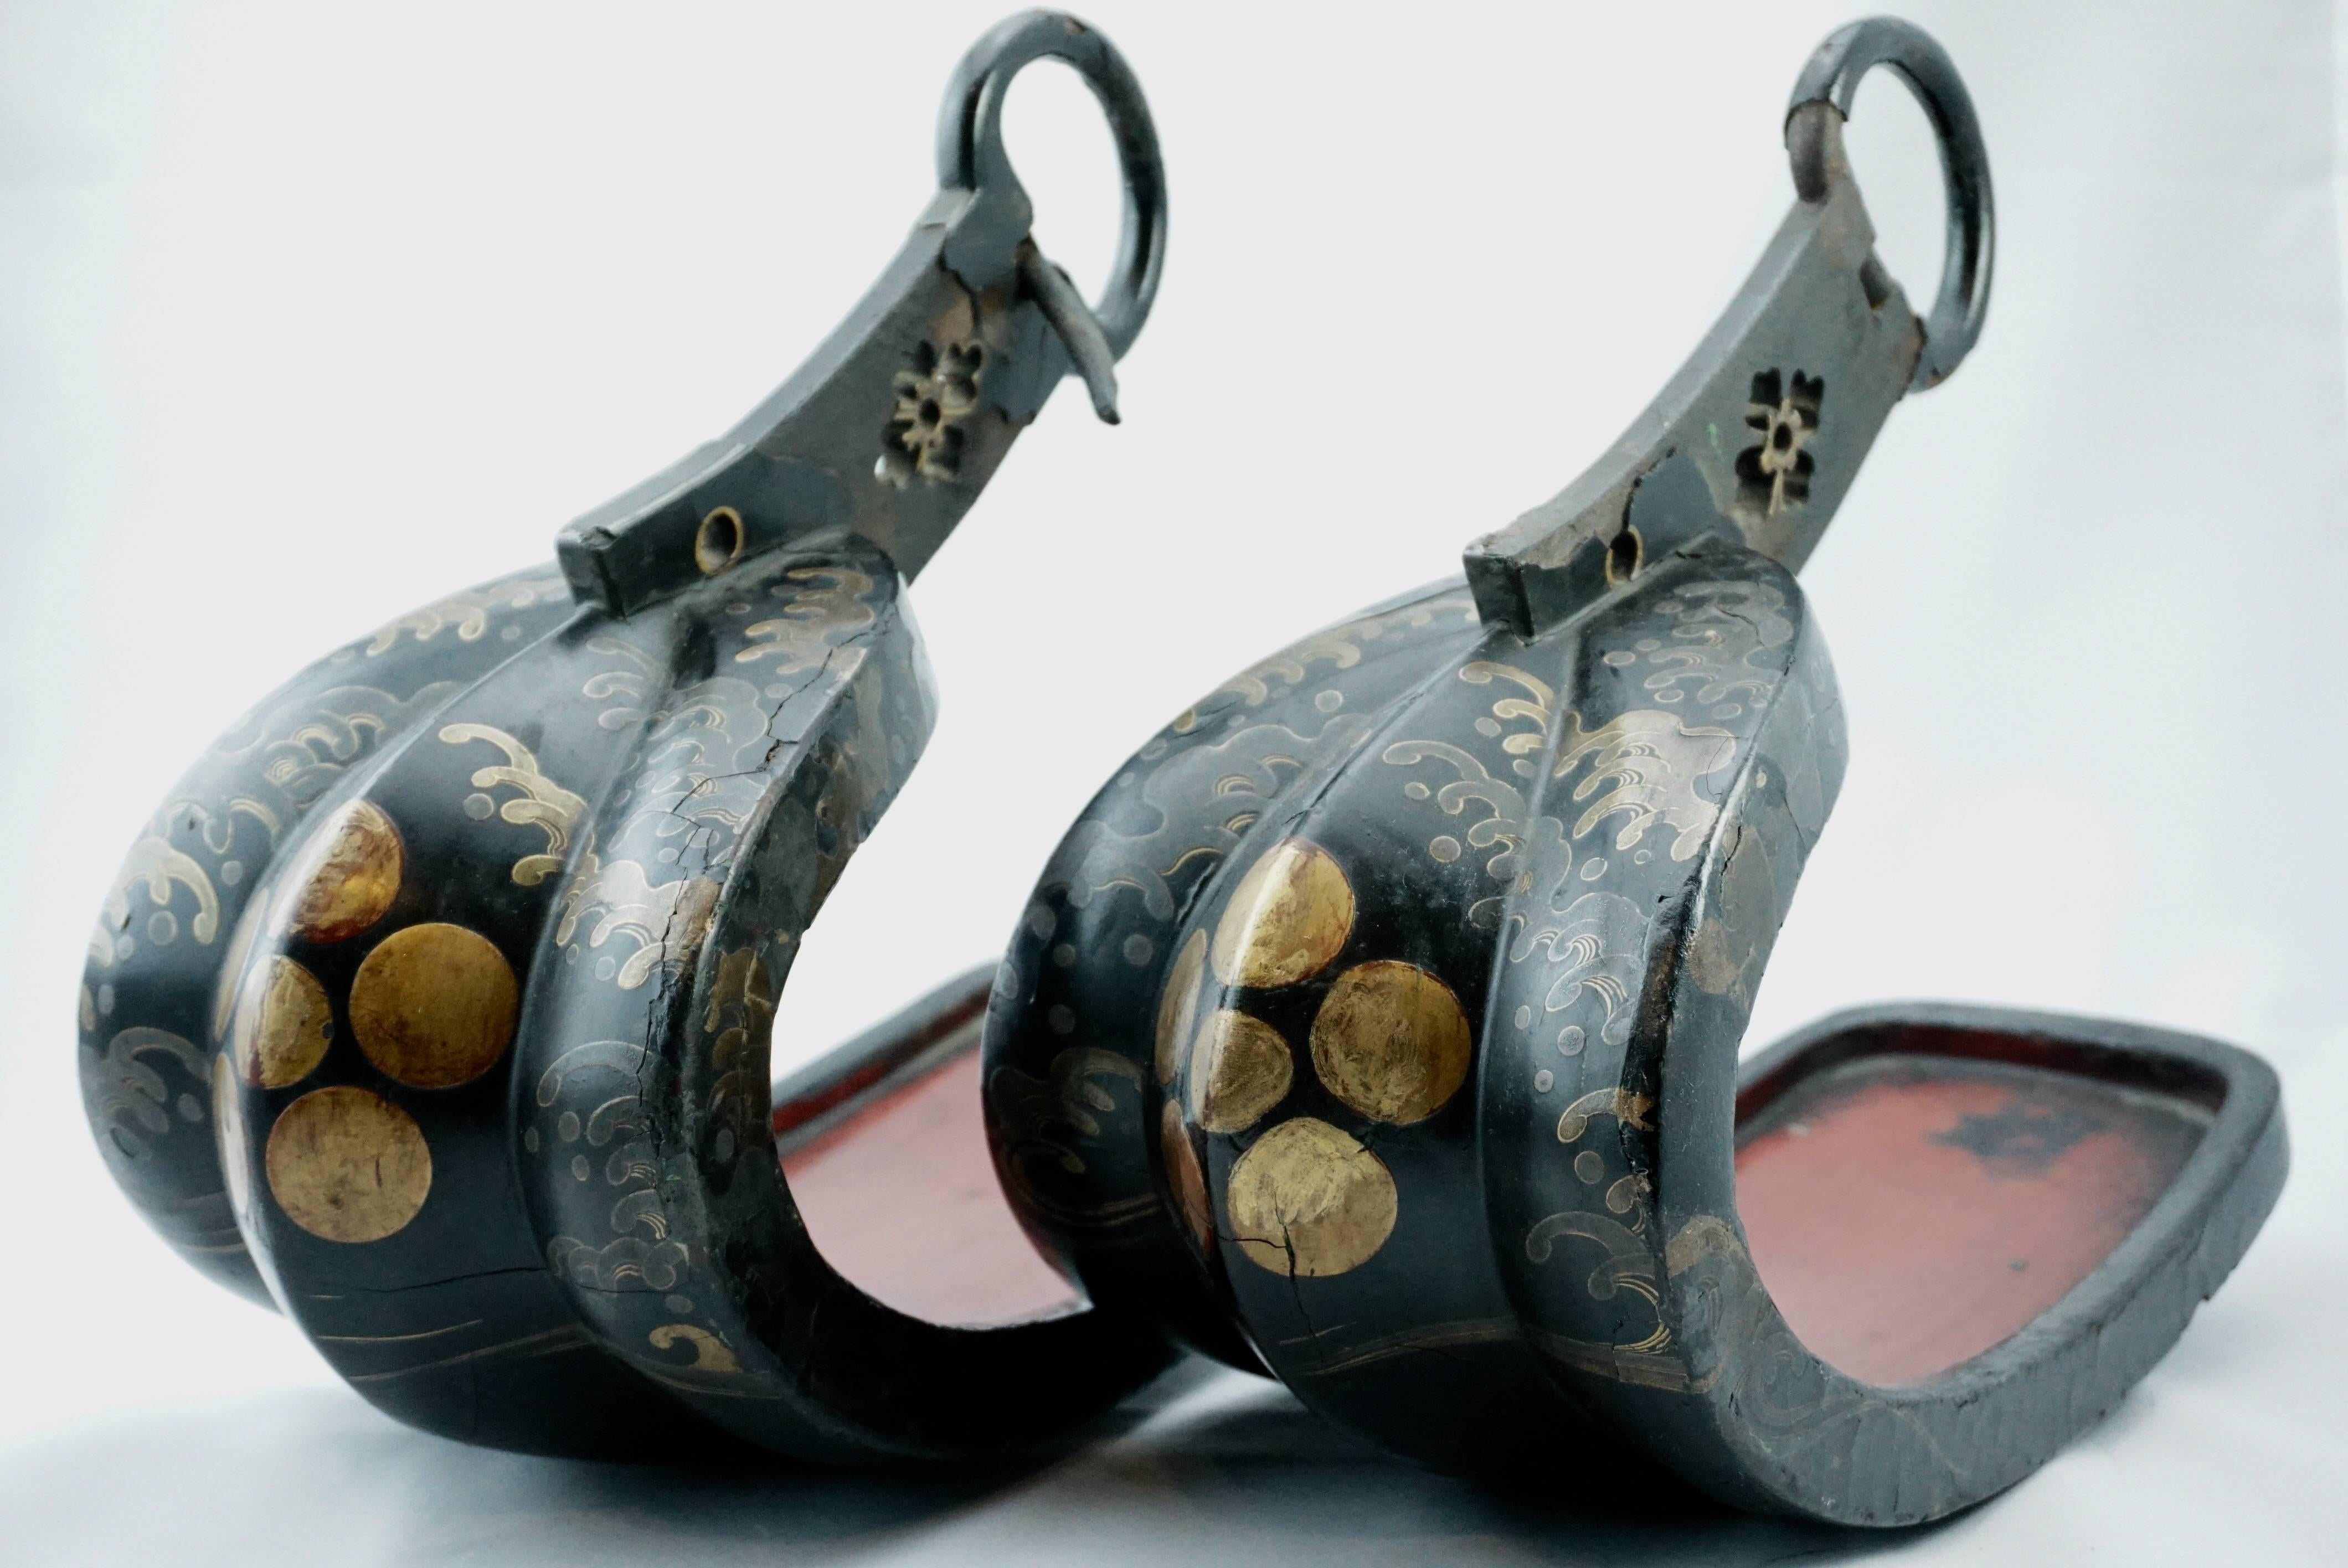 18th century Japanese Edo period Lacquered Samouri Iron stirups with original wooden lacquered insoles. Truly a beautiful pair of Japanese samouri history.

Measures: 11.75 inches long
10.5 inches high

Condition: Good. Some missing and cracked